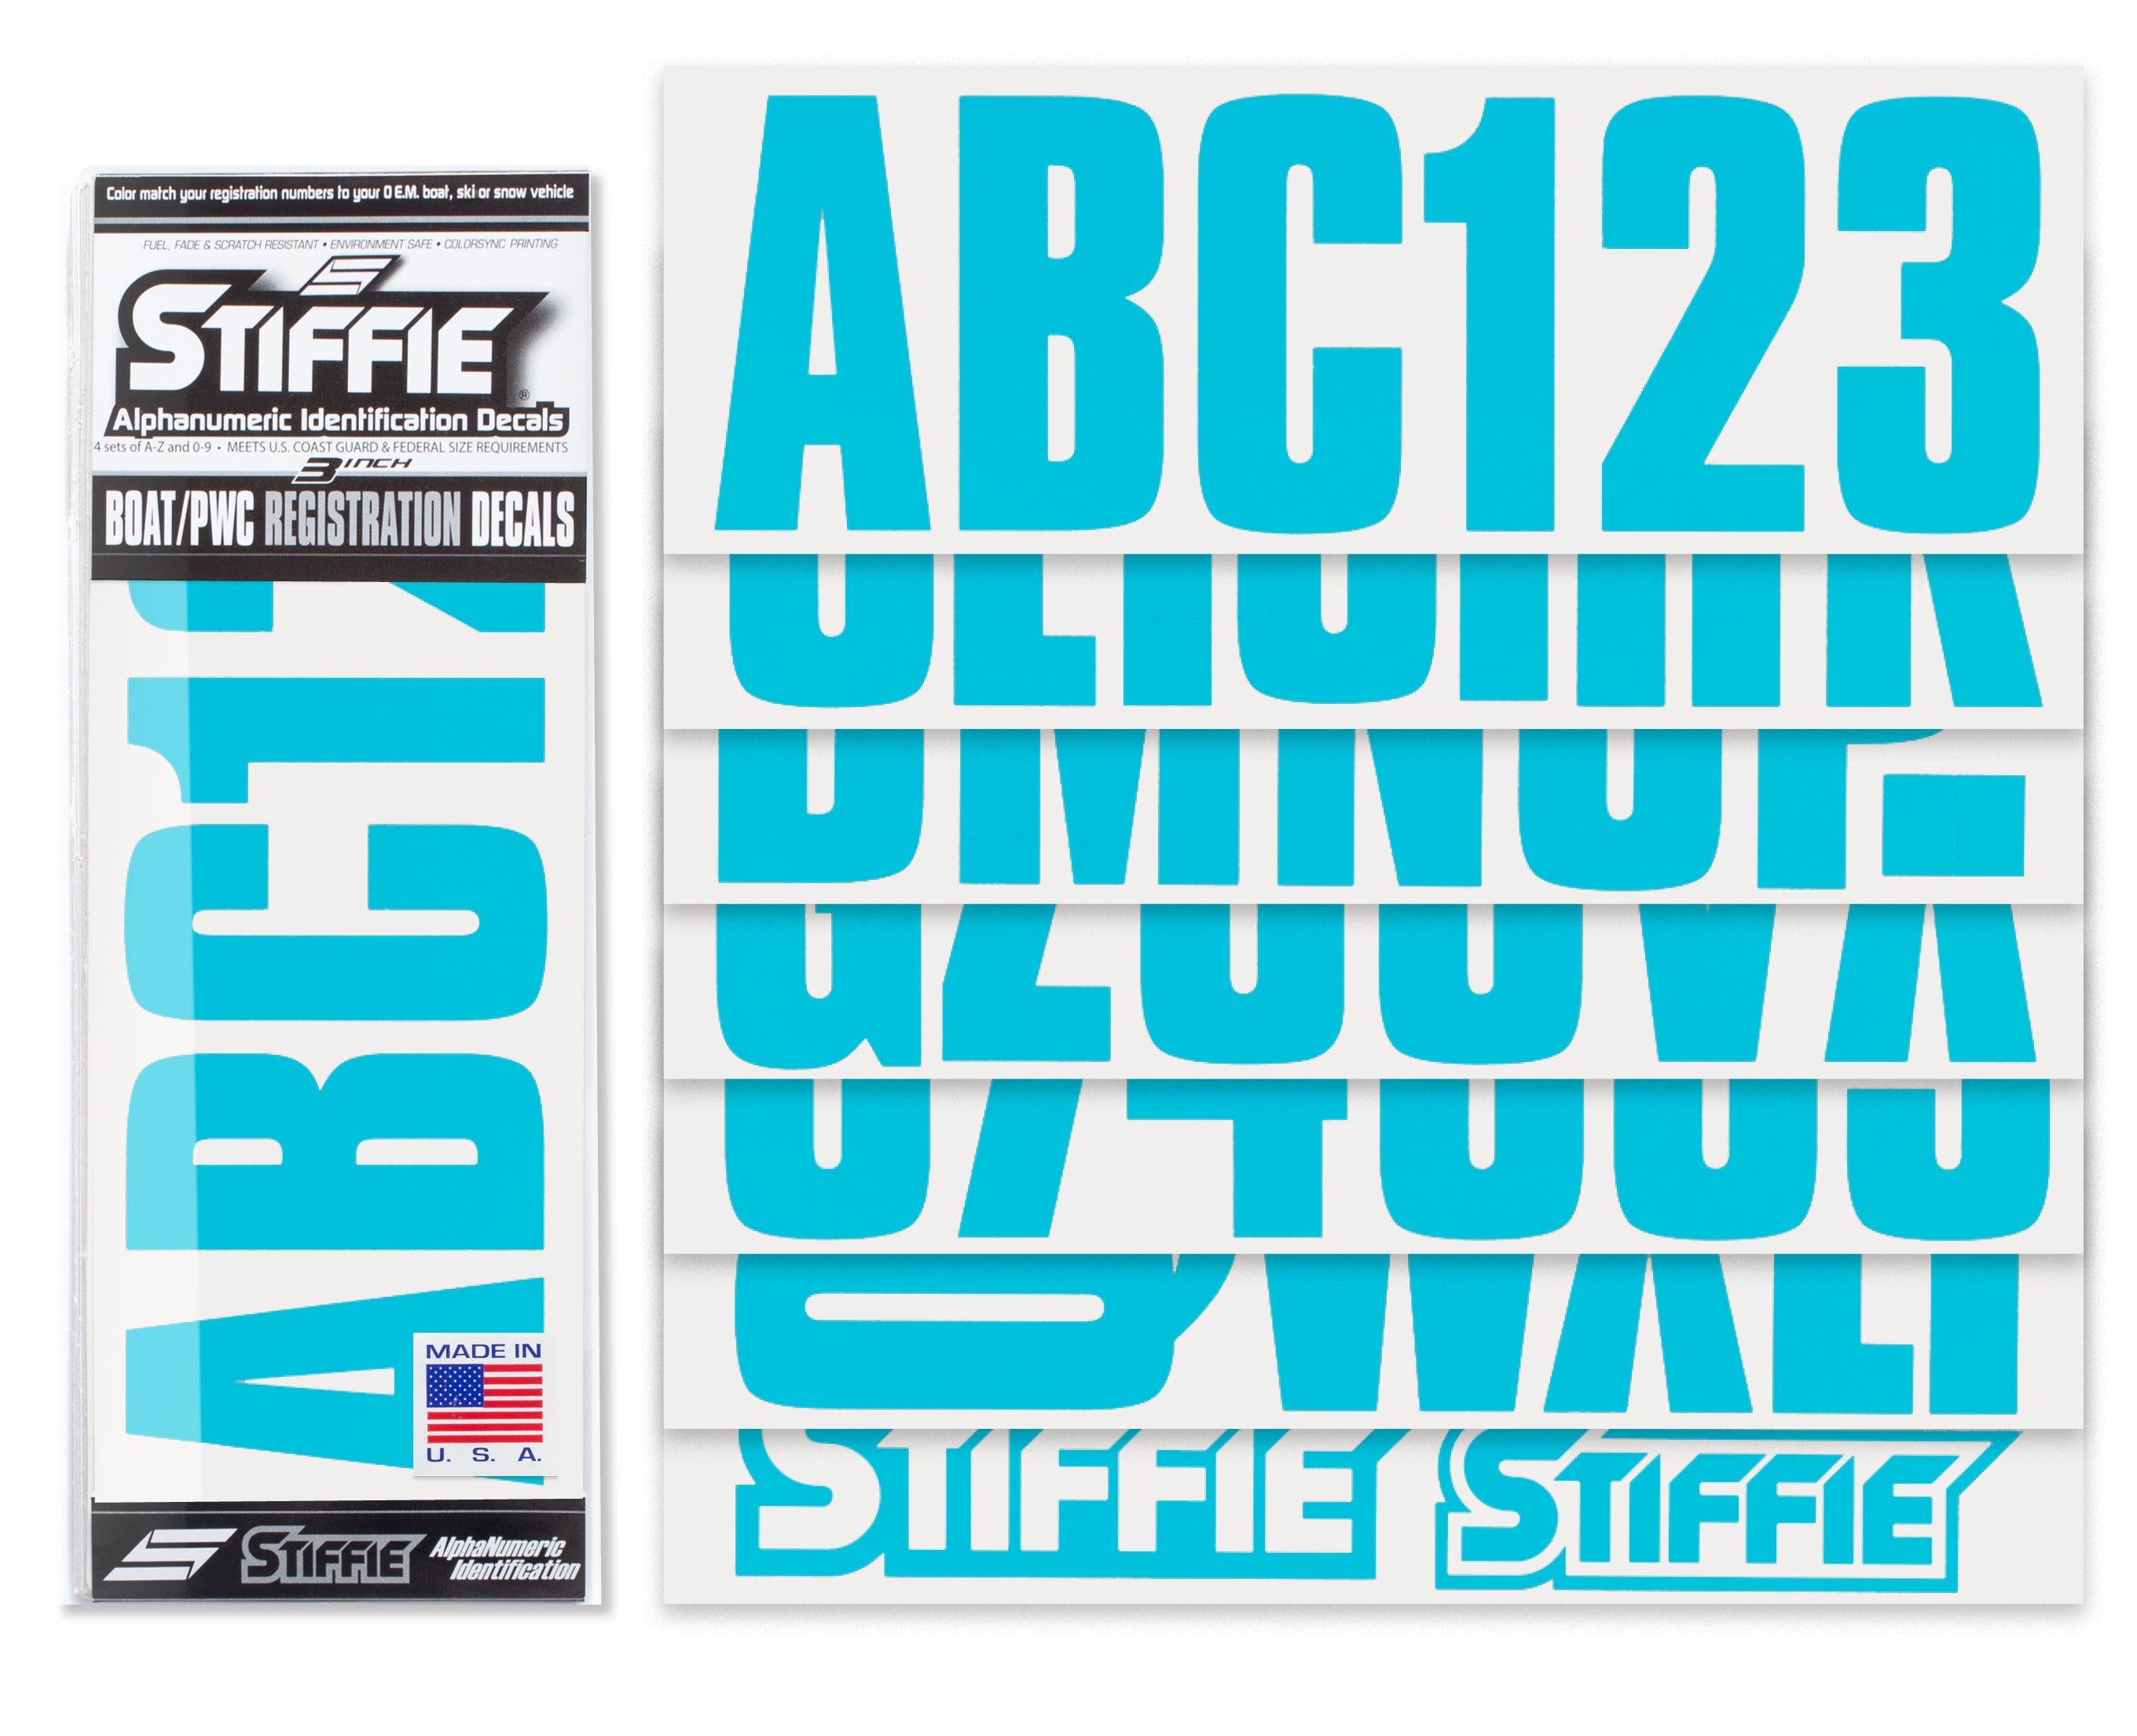 STIFFIE Uniline Sky Blue 3" ID Kit Alpha-Numeric Registration Identification Numbers Stickers Decals for Boats & Personal Watercraft